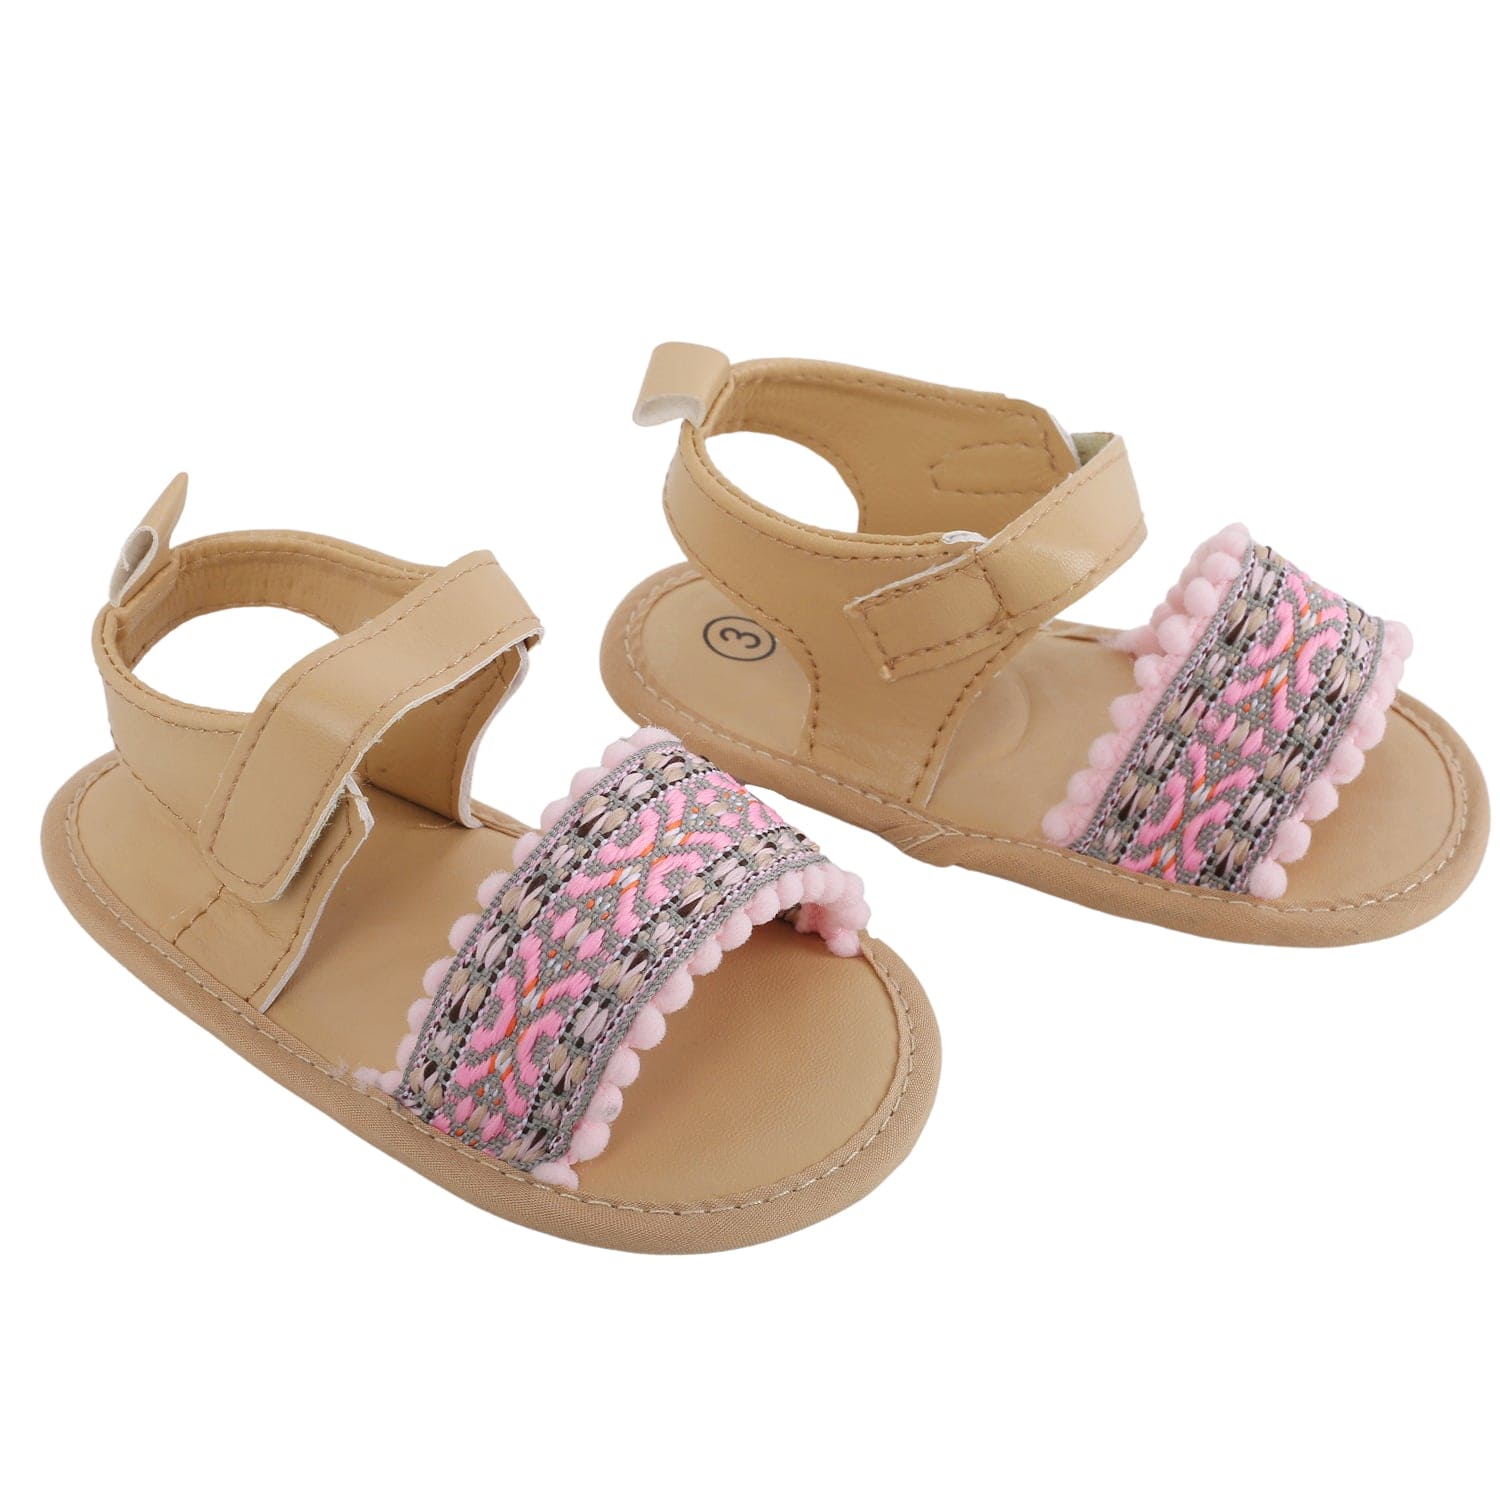 Buy Typo Pink Sandals | Pink Slippers | Pink Flats | Sandals | Ladies  Sandals | Ladies Flats Pink Size - 8 UK (41 EU) at Amazon.in